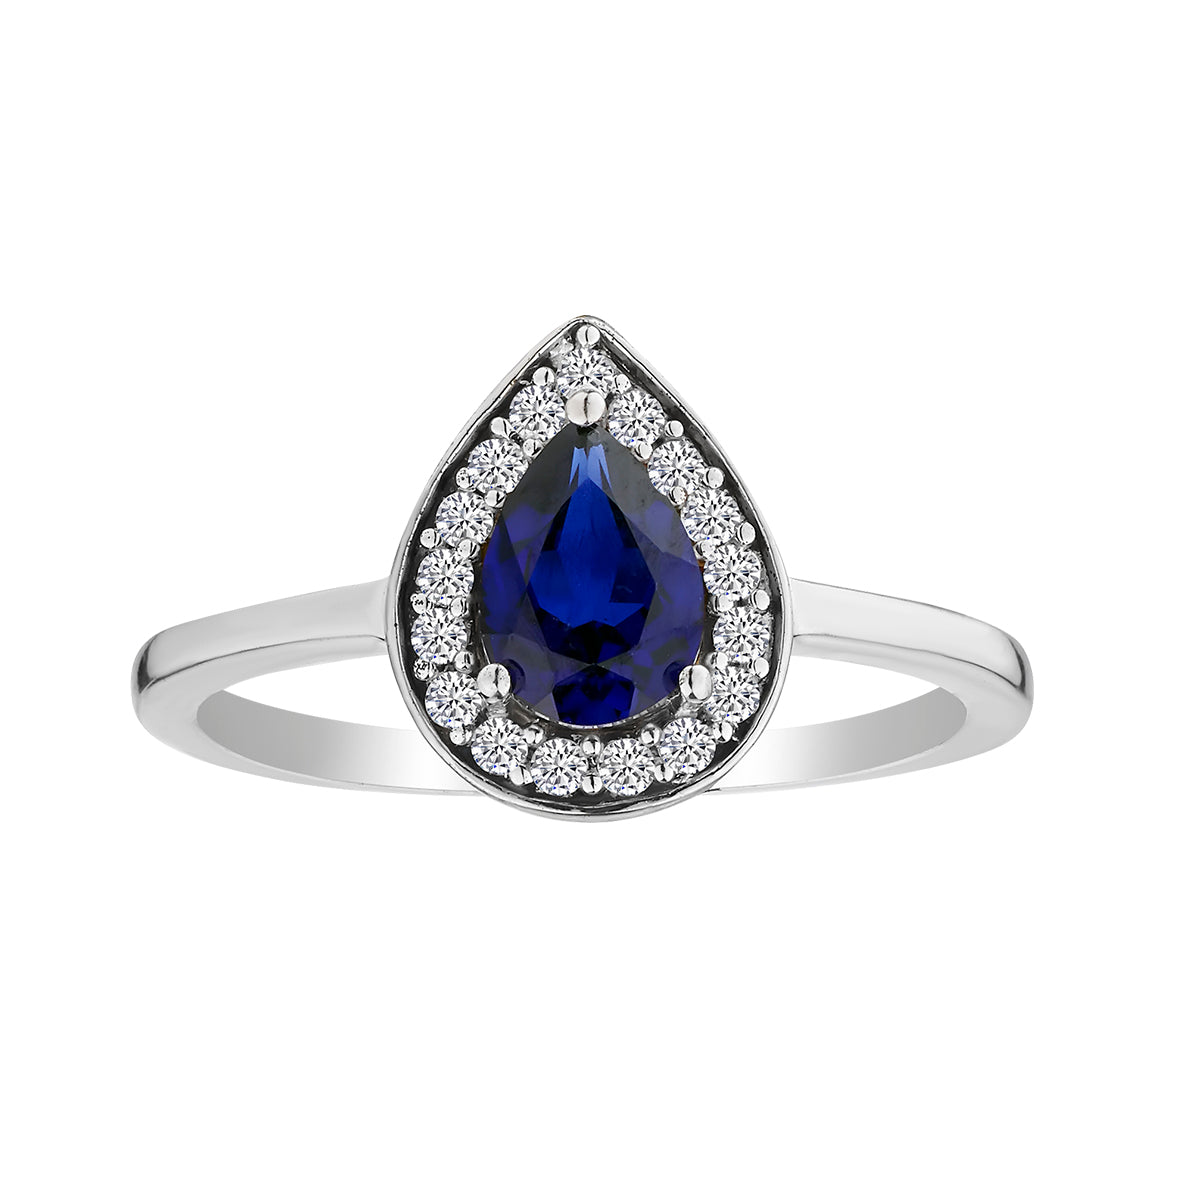 Pear Shape Created Blue Sapphire and White Sapphire Halo Ring, Sterling Silver.......................NOW